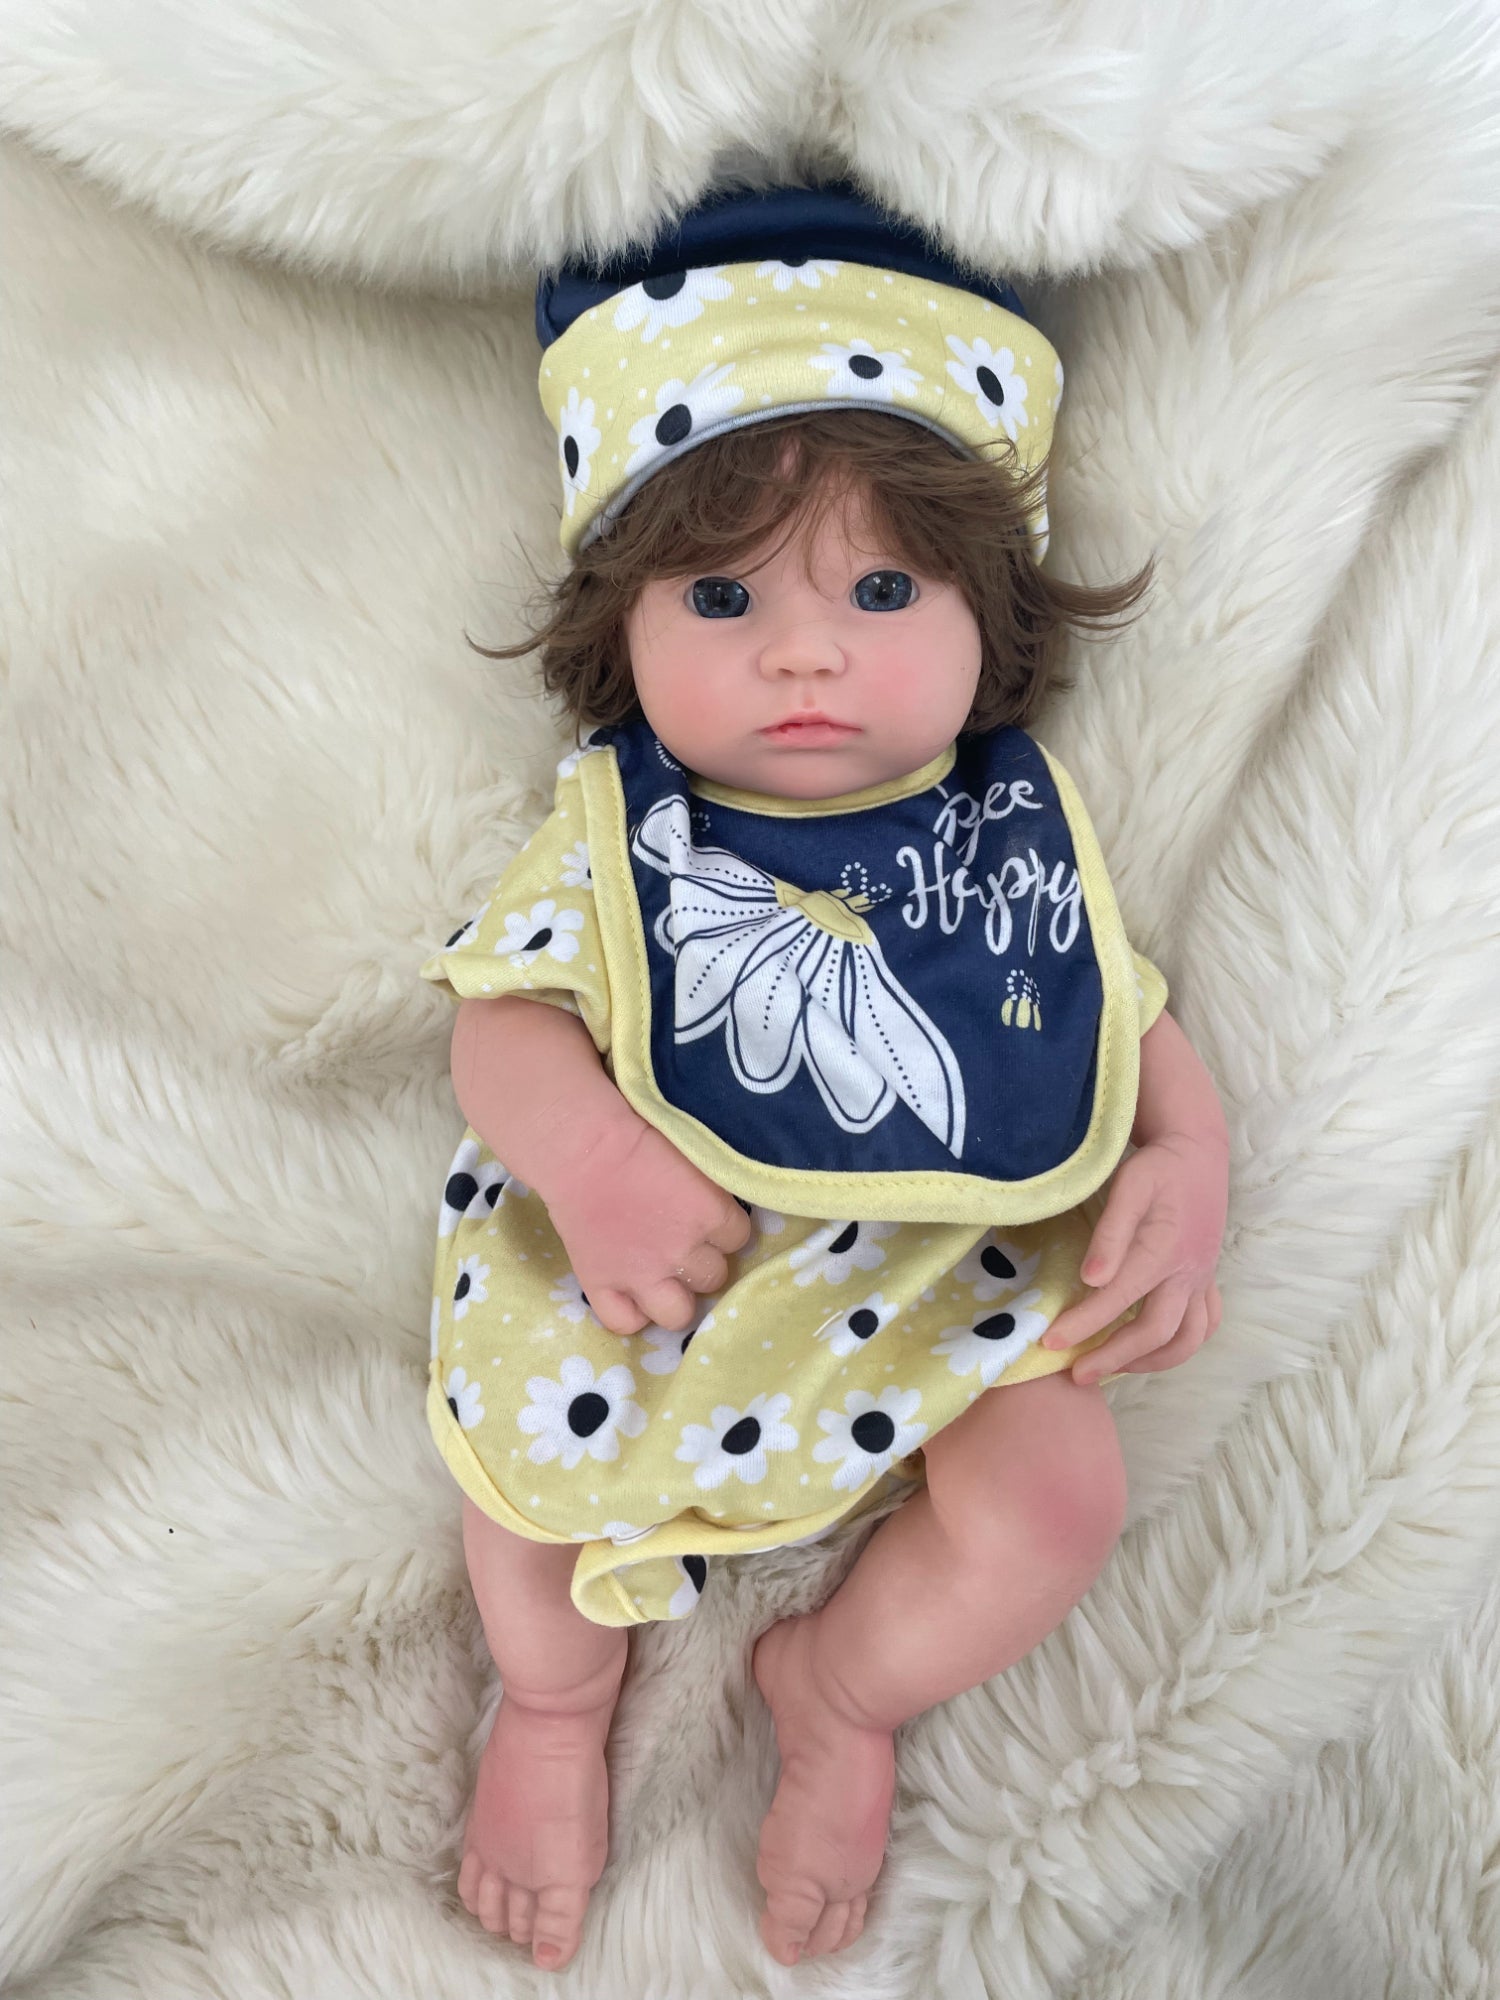 35 Cm Full Body Solid Silicone Bebe Reborn Doll Painted By Artists - Reborn With Love Baby Dolls Store